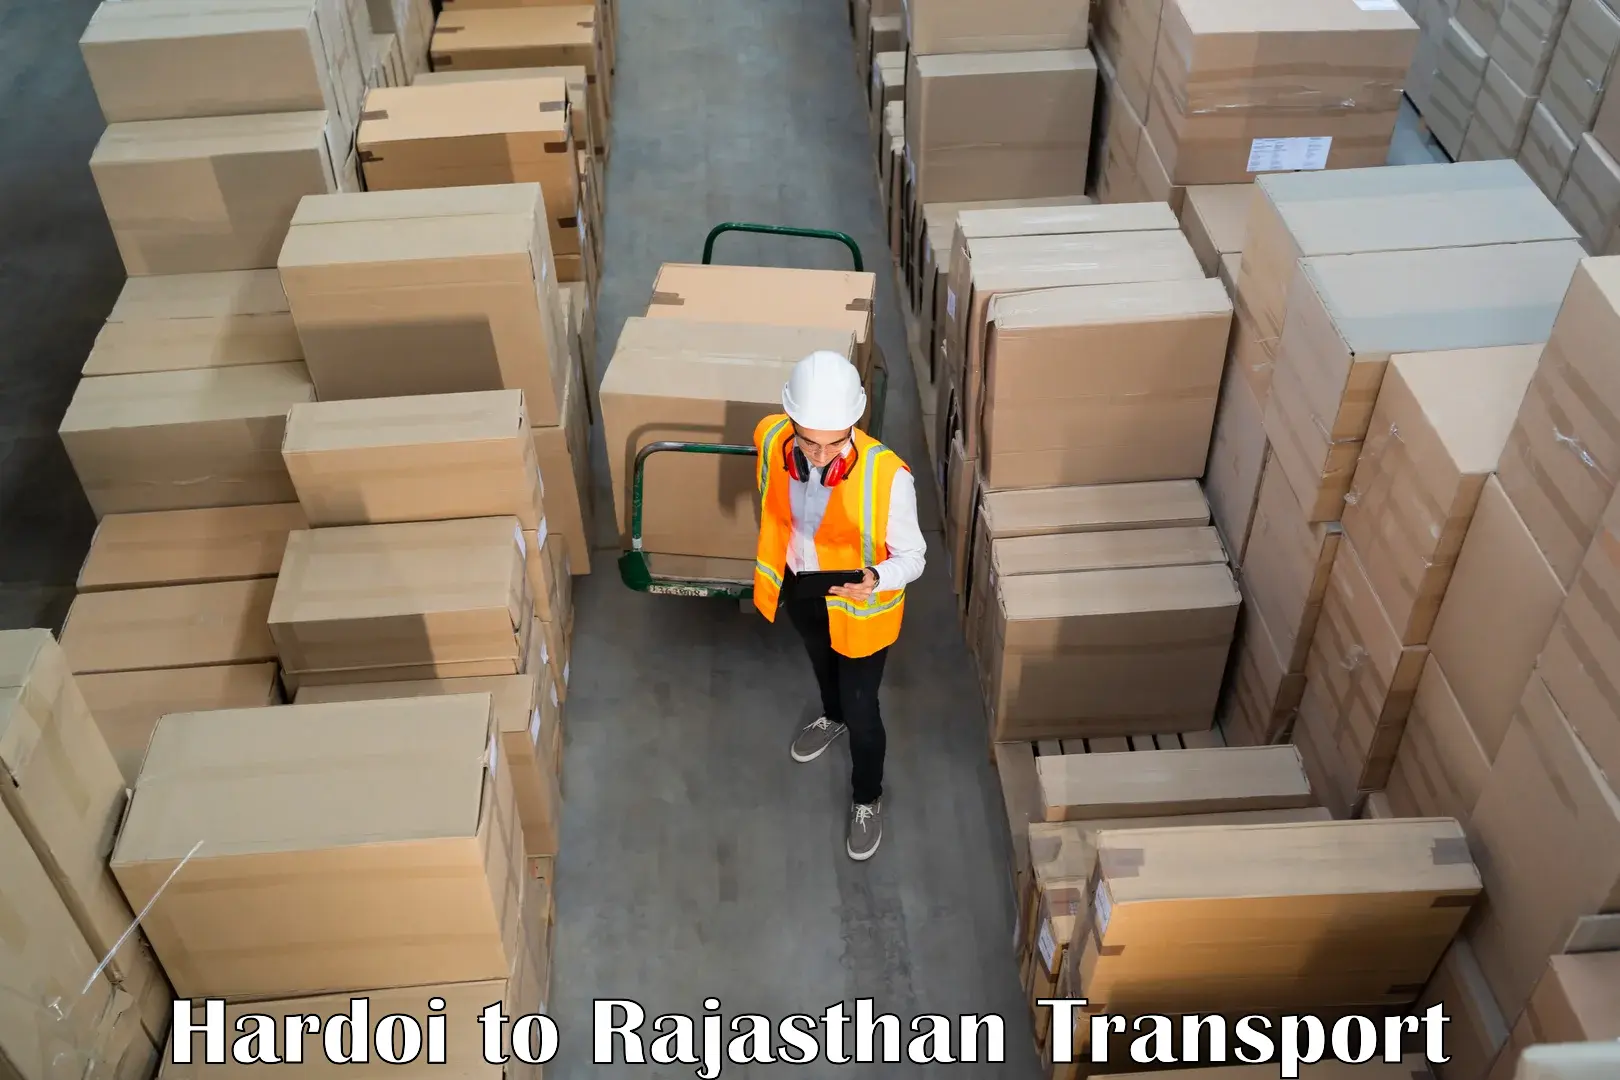 Part load transport service in India Hardoi to Rajasthan